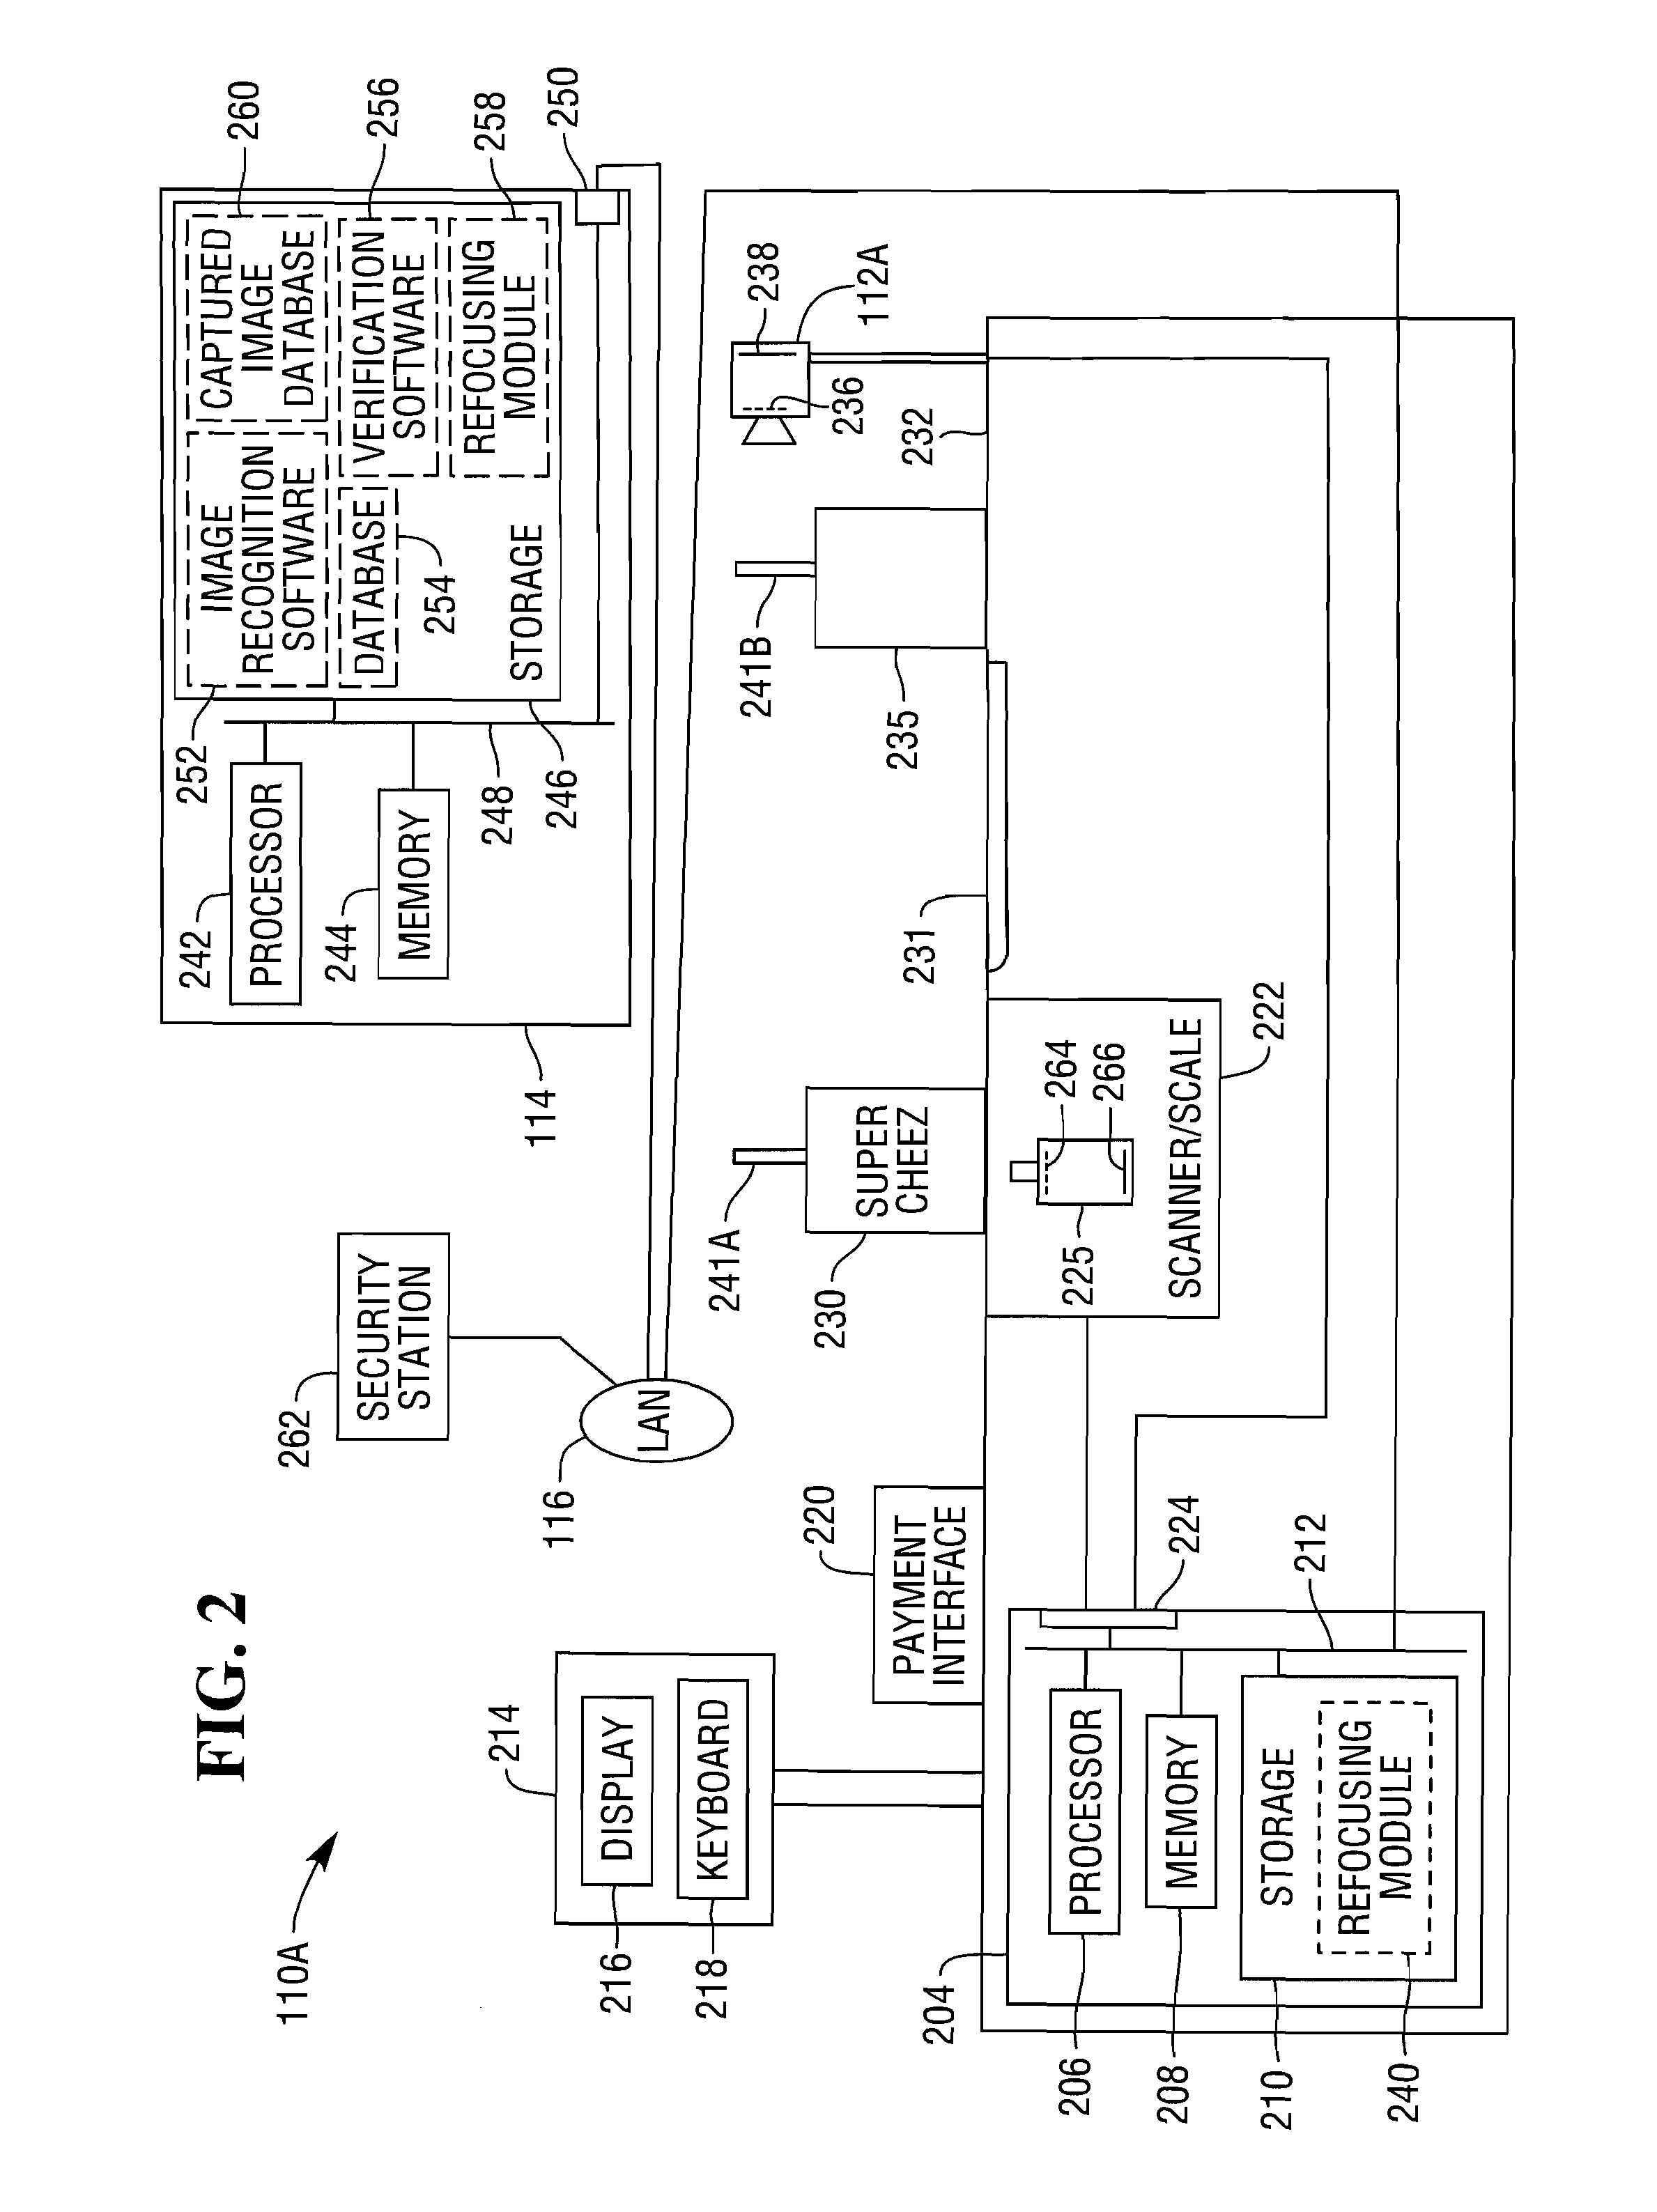 Methods and Apparatus for Improved Image Processing to Provide Retroactive Image Focusing and Improved Depth of Field in Retail Imaging Systems